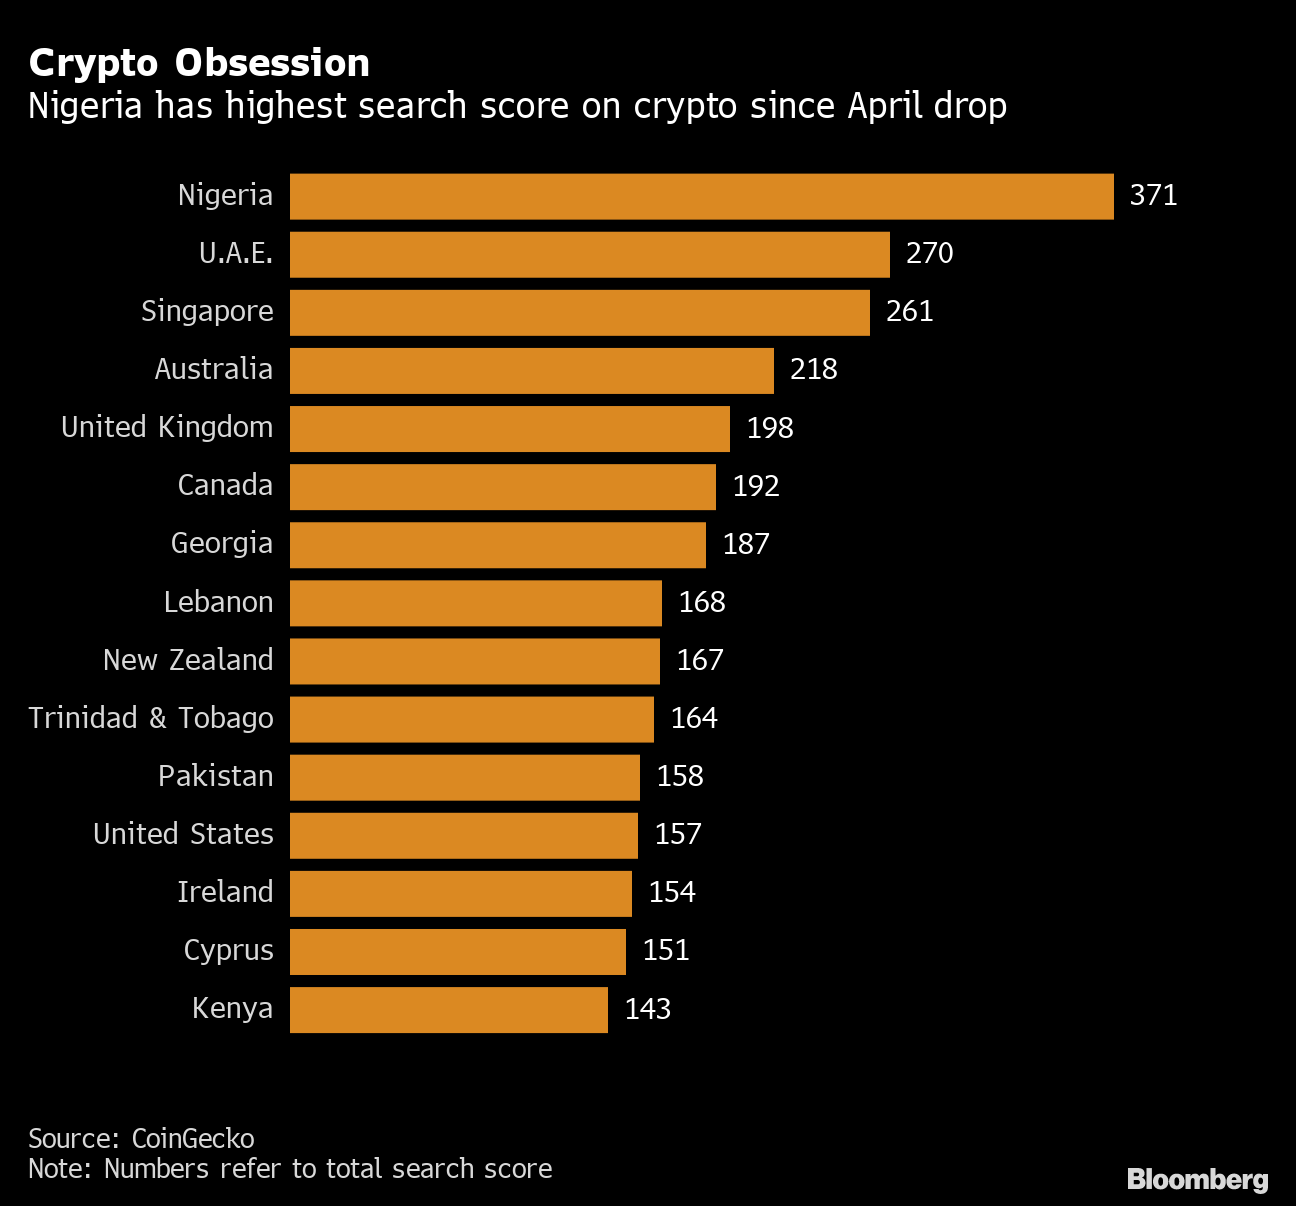 Nigeria Has Most Interest in Cryptocurrency, CoinGecko Study Shows -  Bloomberg